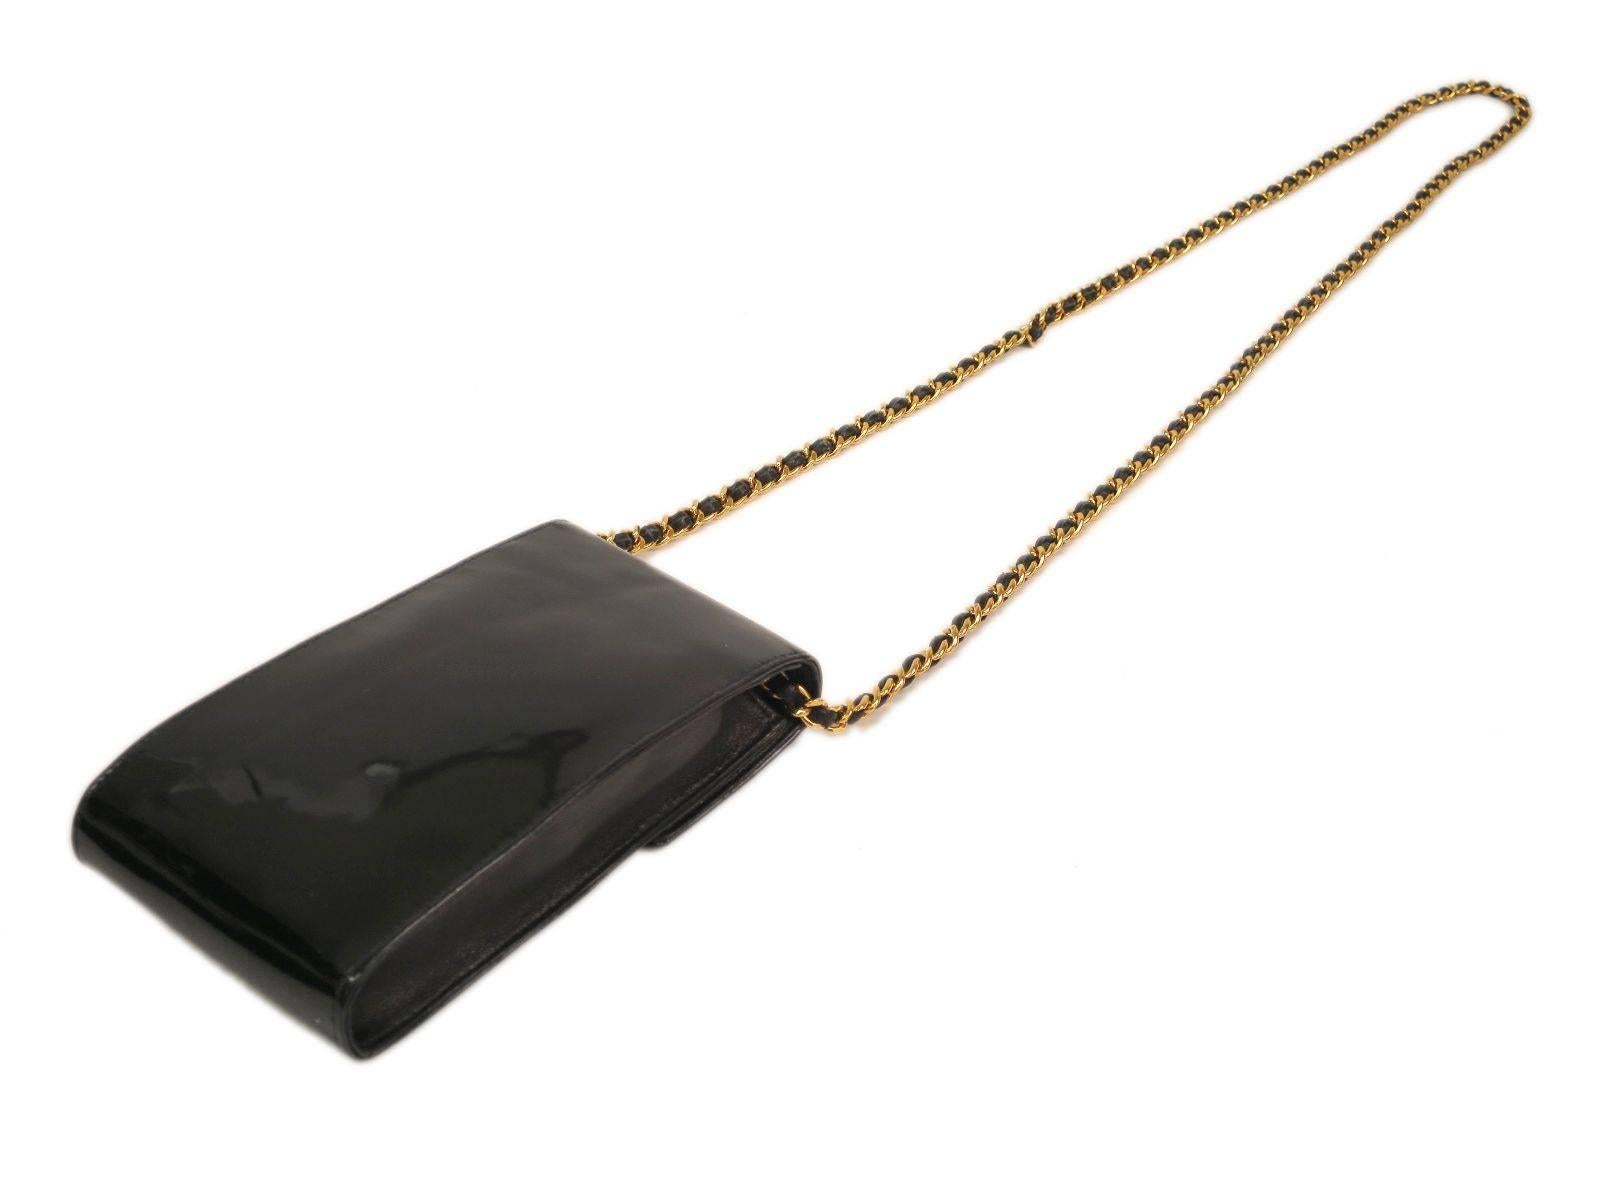 CURATOR'S NOTES

Whether for your cell phone or night out provisions, this mini Chanel patent leather chain shoulder bag will surely come in handy.

Style Tip: Rock it crossbody style or dangle it from your shoulder depending on your mood or